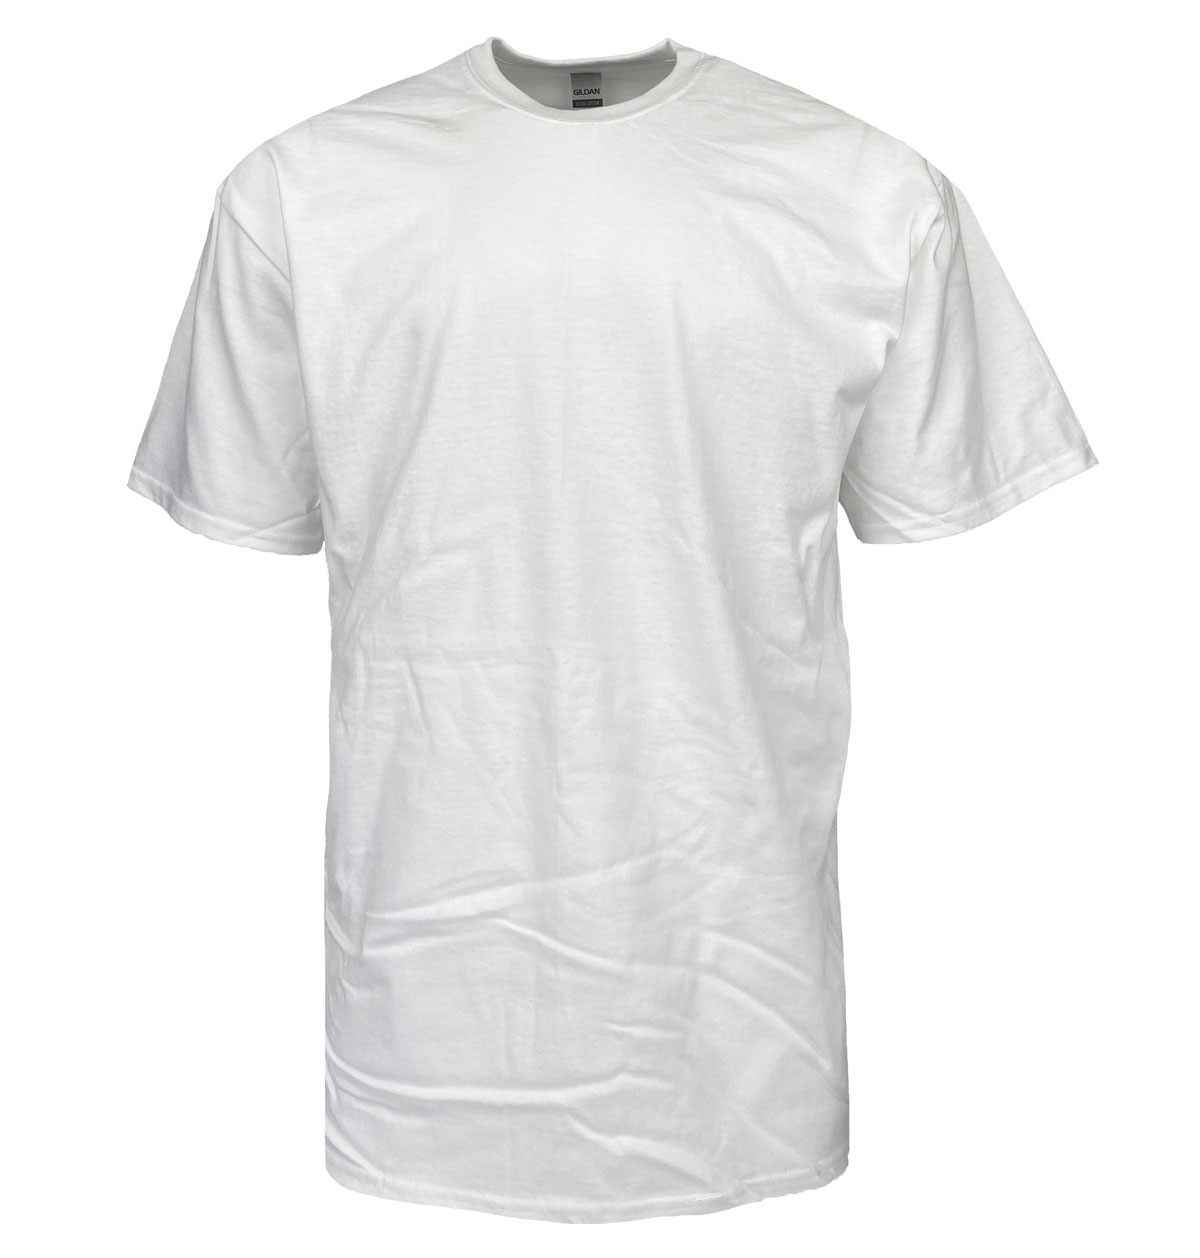 Mens Tall Cotton T-Shirts-RG Riley Wholesale Off Price Clothing ...